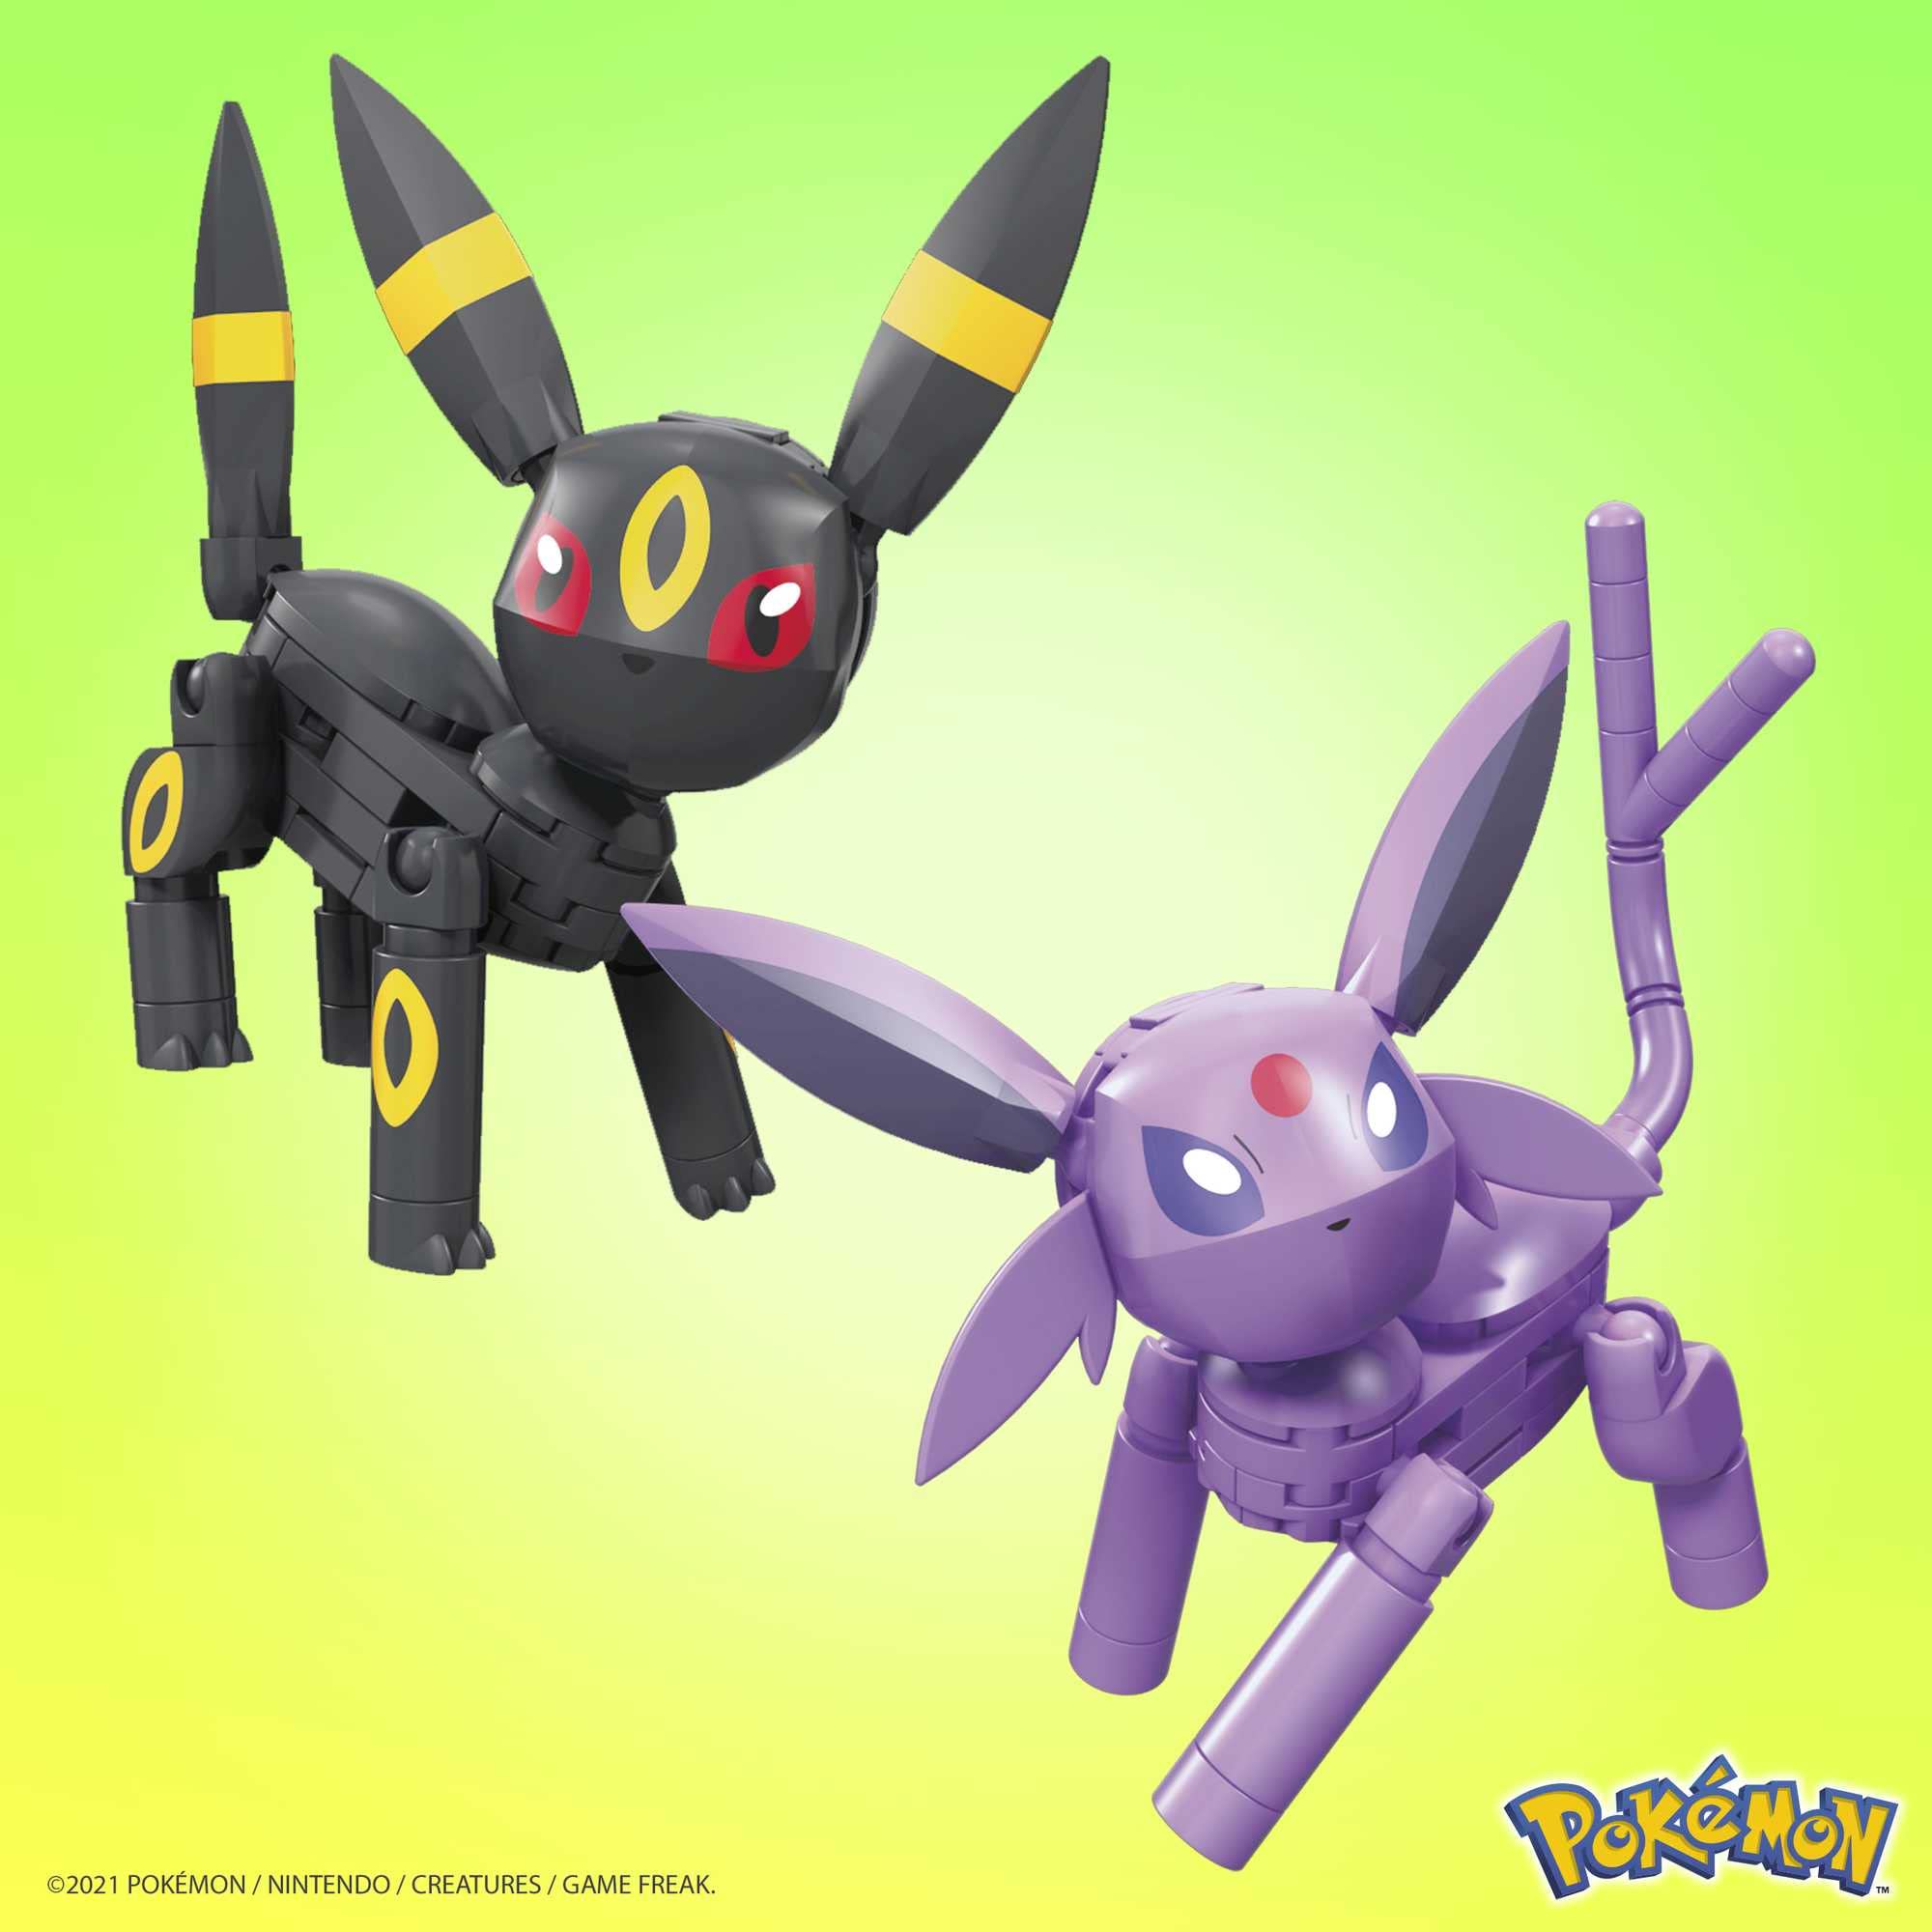 MEGA Pokémon Action Figure Building Toys, Umbreon & Espeon With 122 Pieces, 2 Poseable Characters, 4 Inches Tall, Gift Idea For Kids